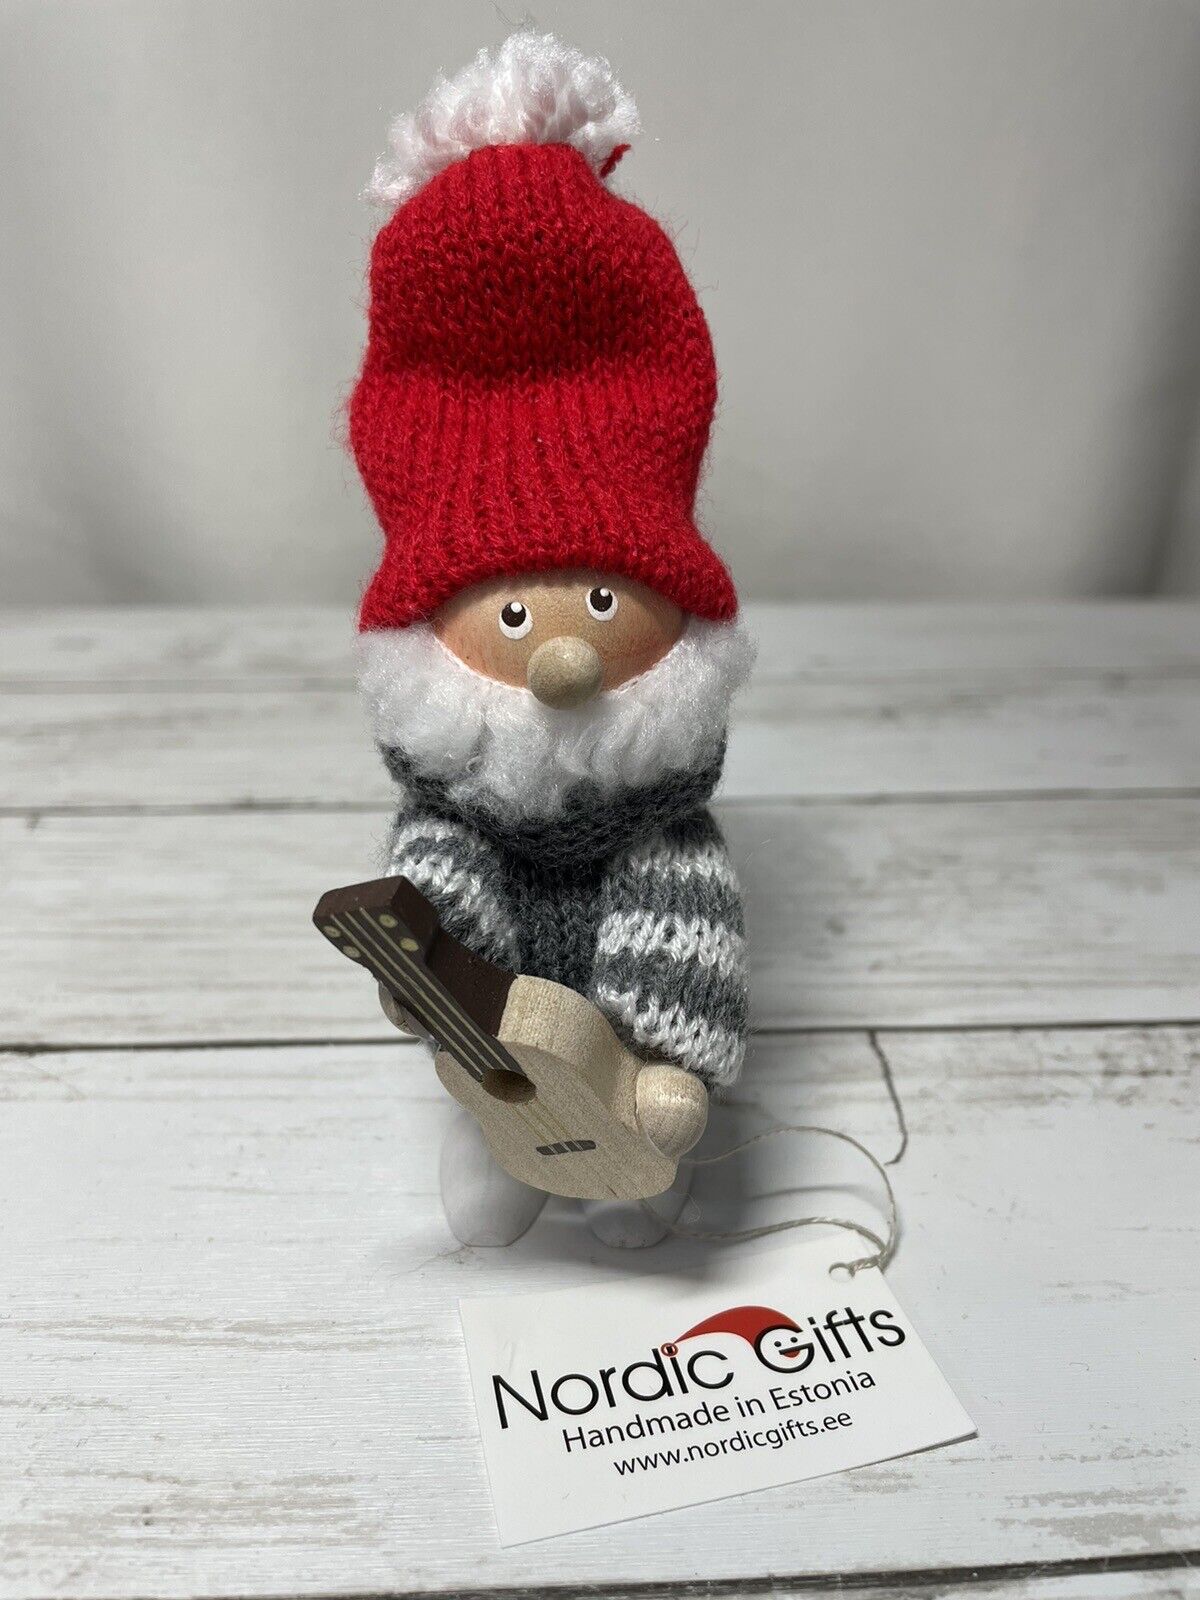 Nordic Gifts Wooden Tomte Elf w/grey sweater, red hat, guitar - Estonia NEW